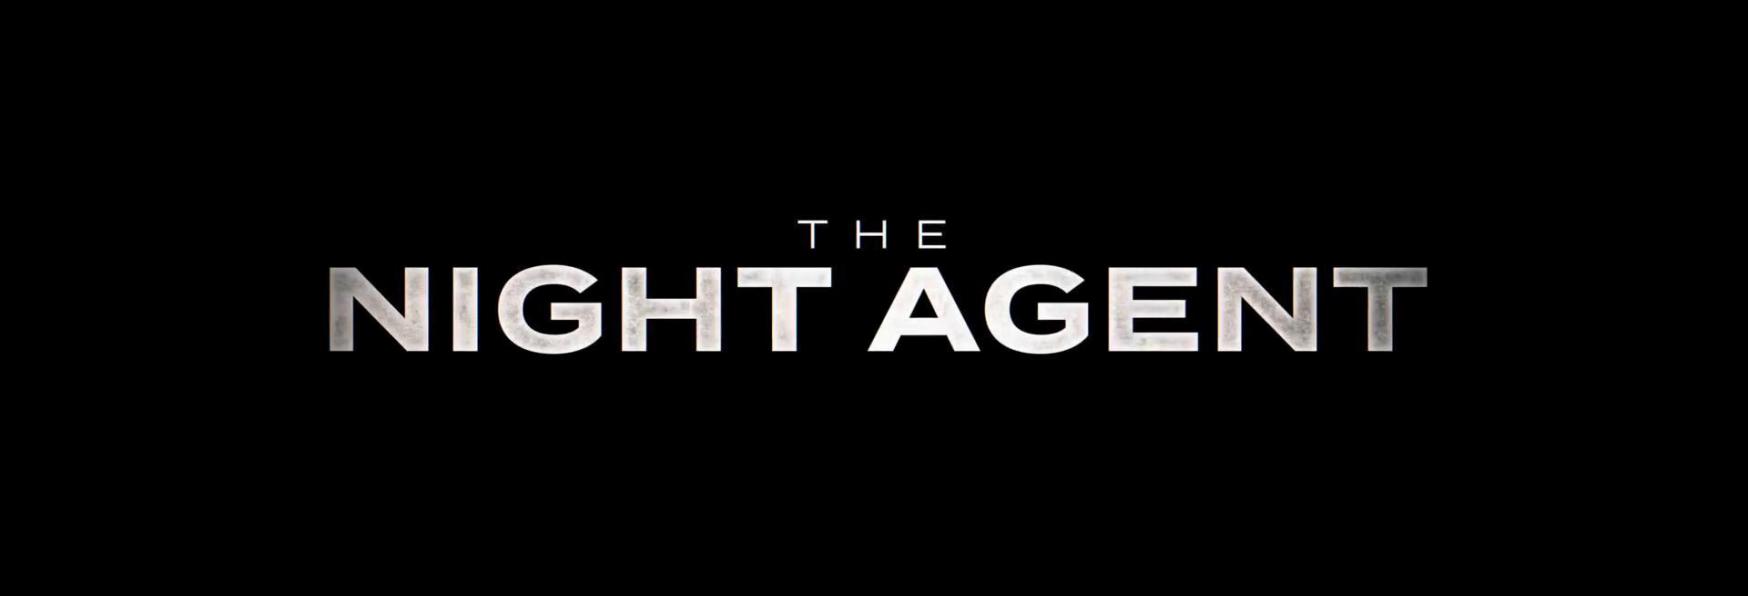 The Night Agent: Plot, Cast, Characters, Trailer and Release Date of the new Netflix TV Series Adaptation